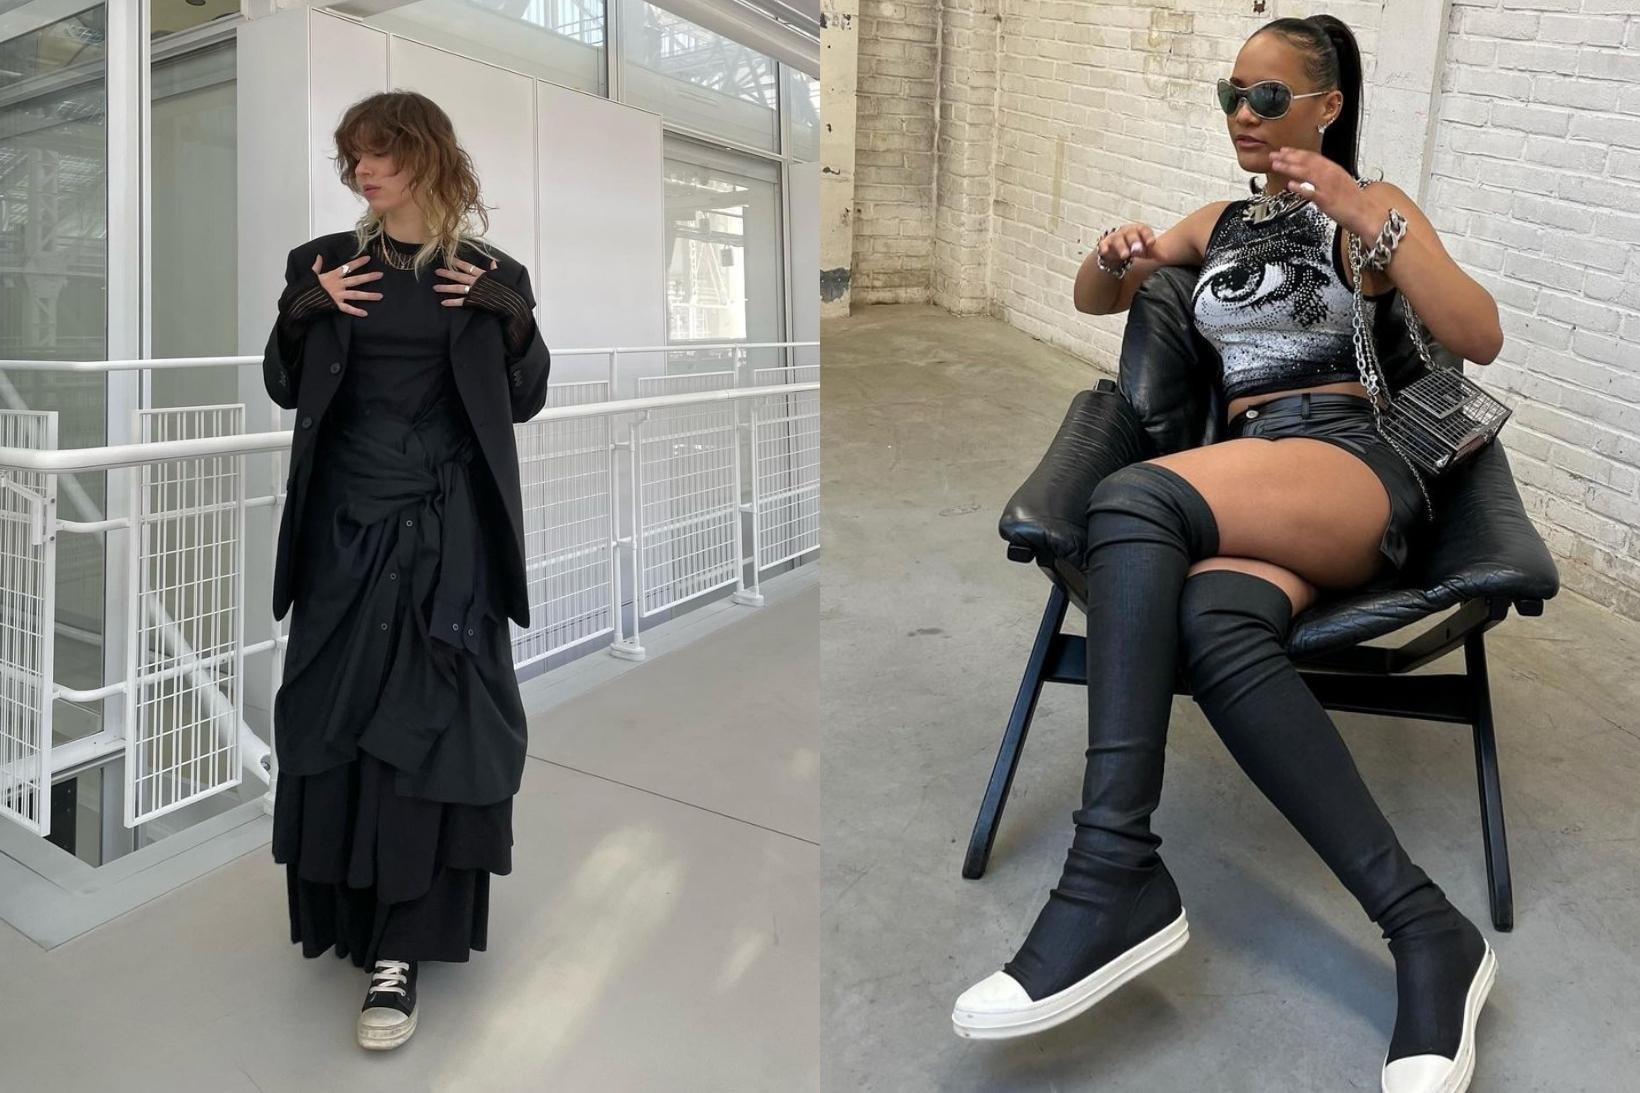 How to Style Rick Owens Sneakers